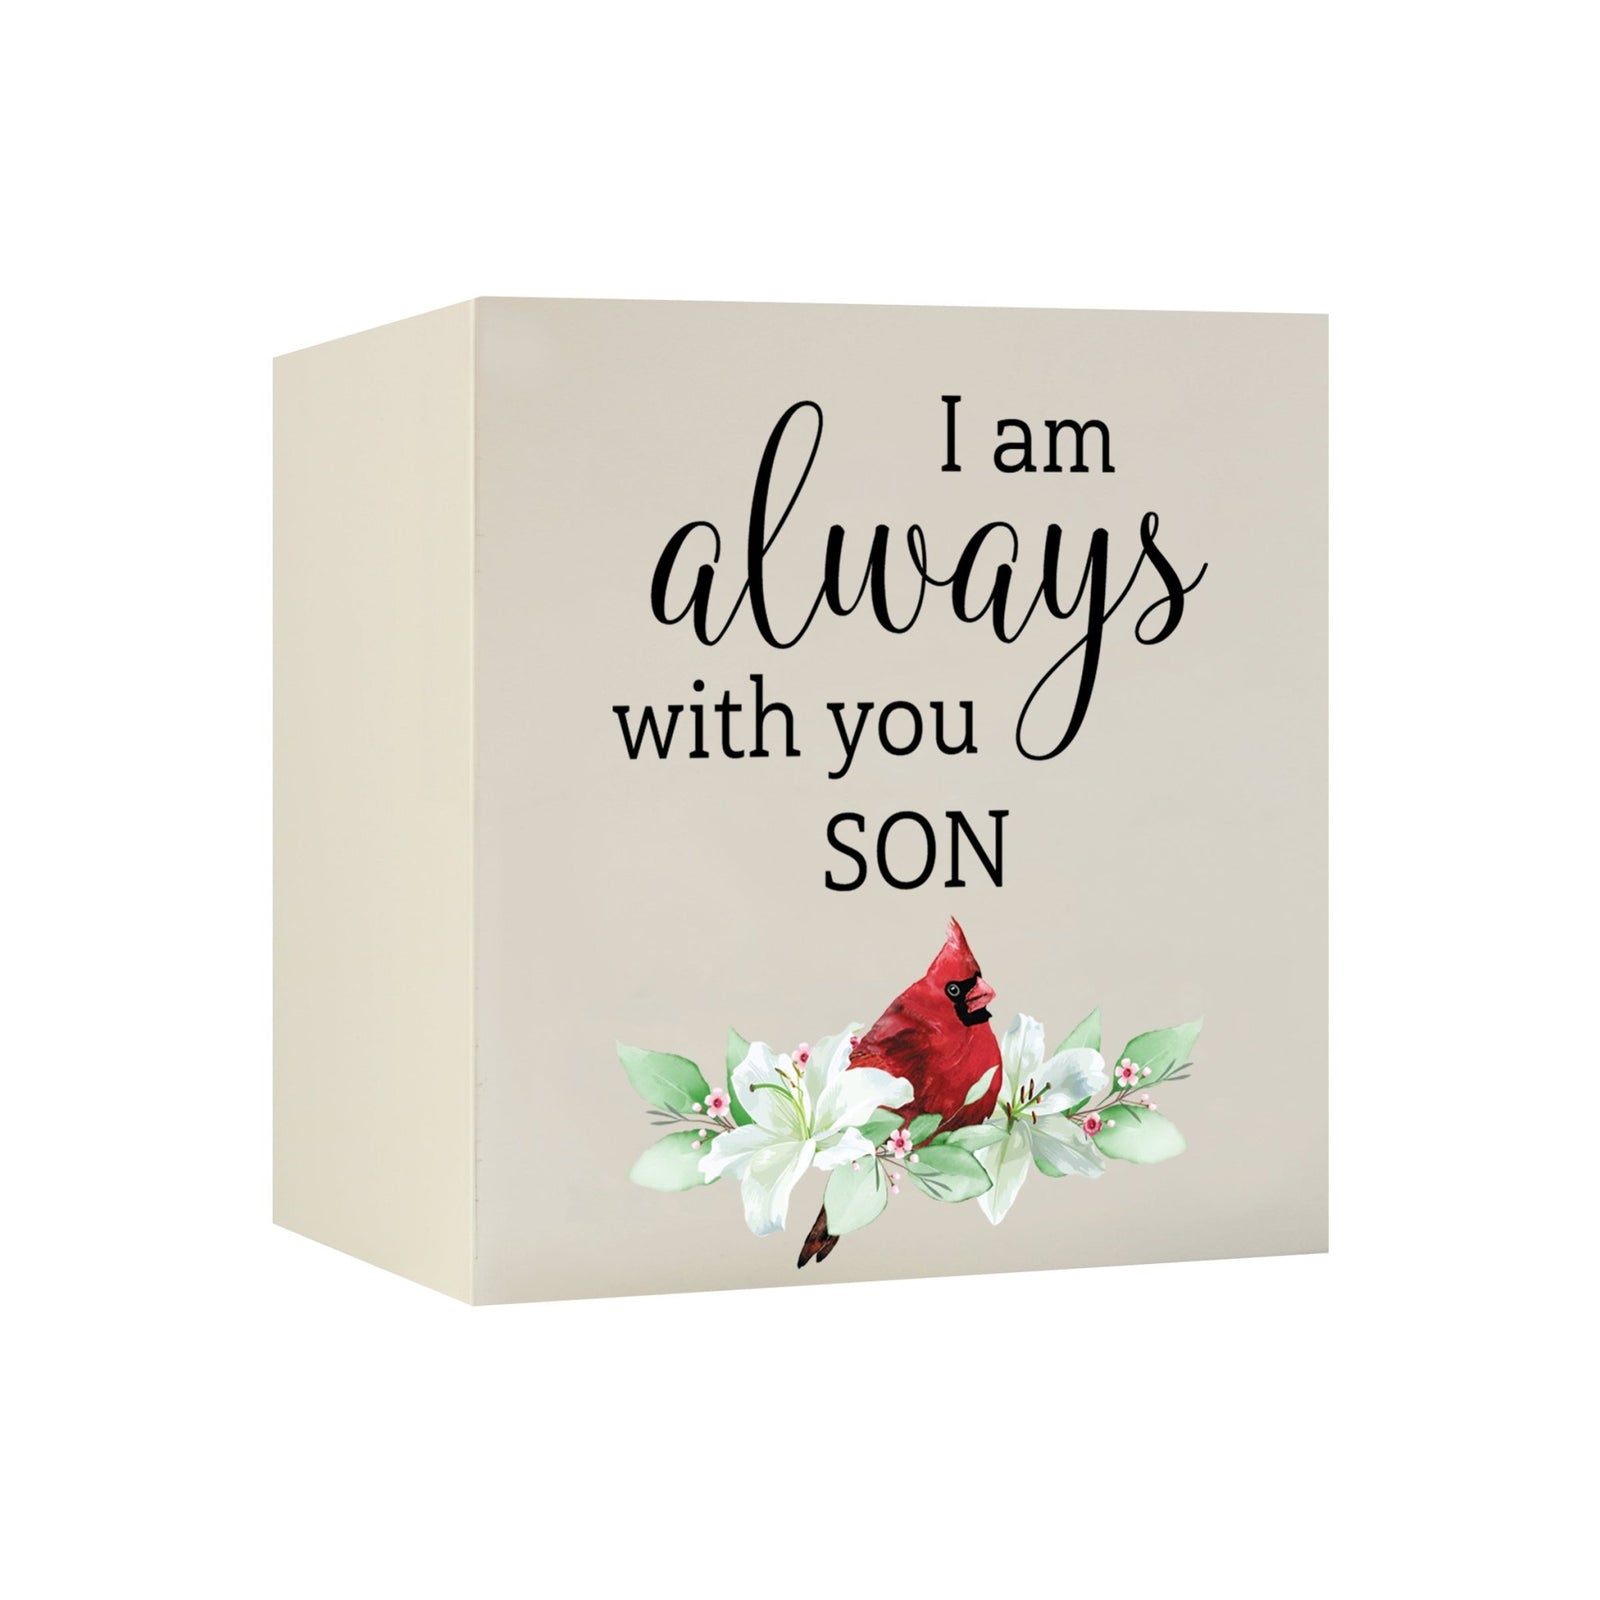 Lifesong Milestones Memorial Wooden Cremation Urn Box for Human Ashes - A beautiful and meaningful resting place